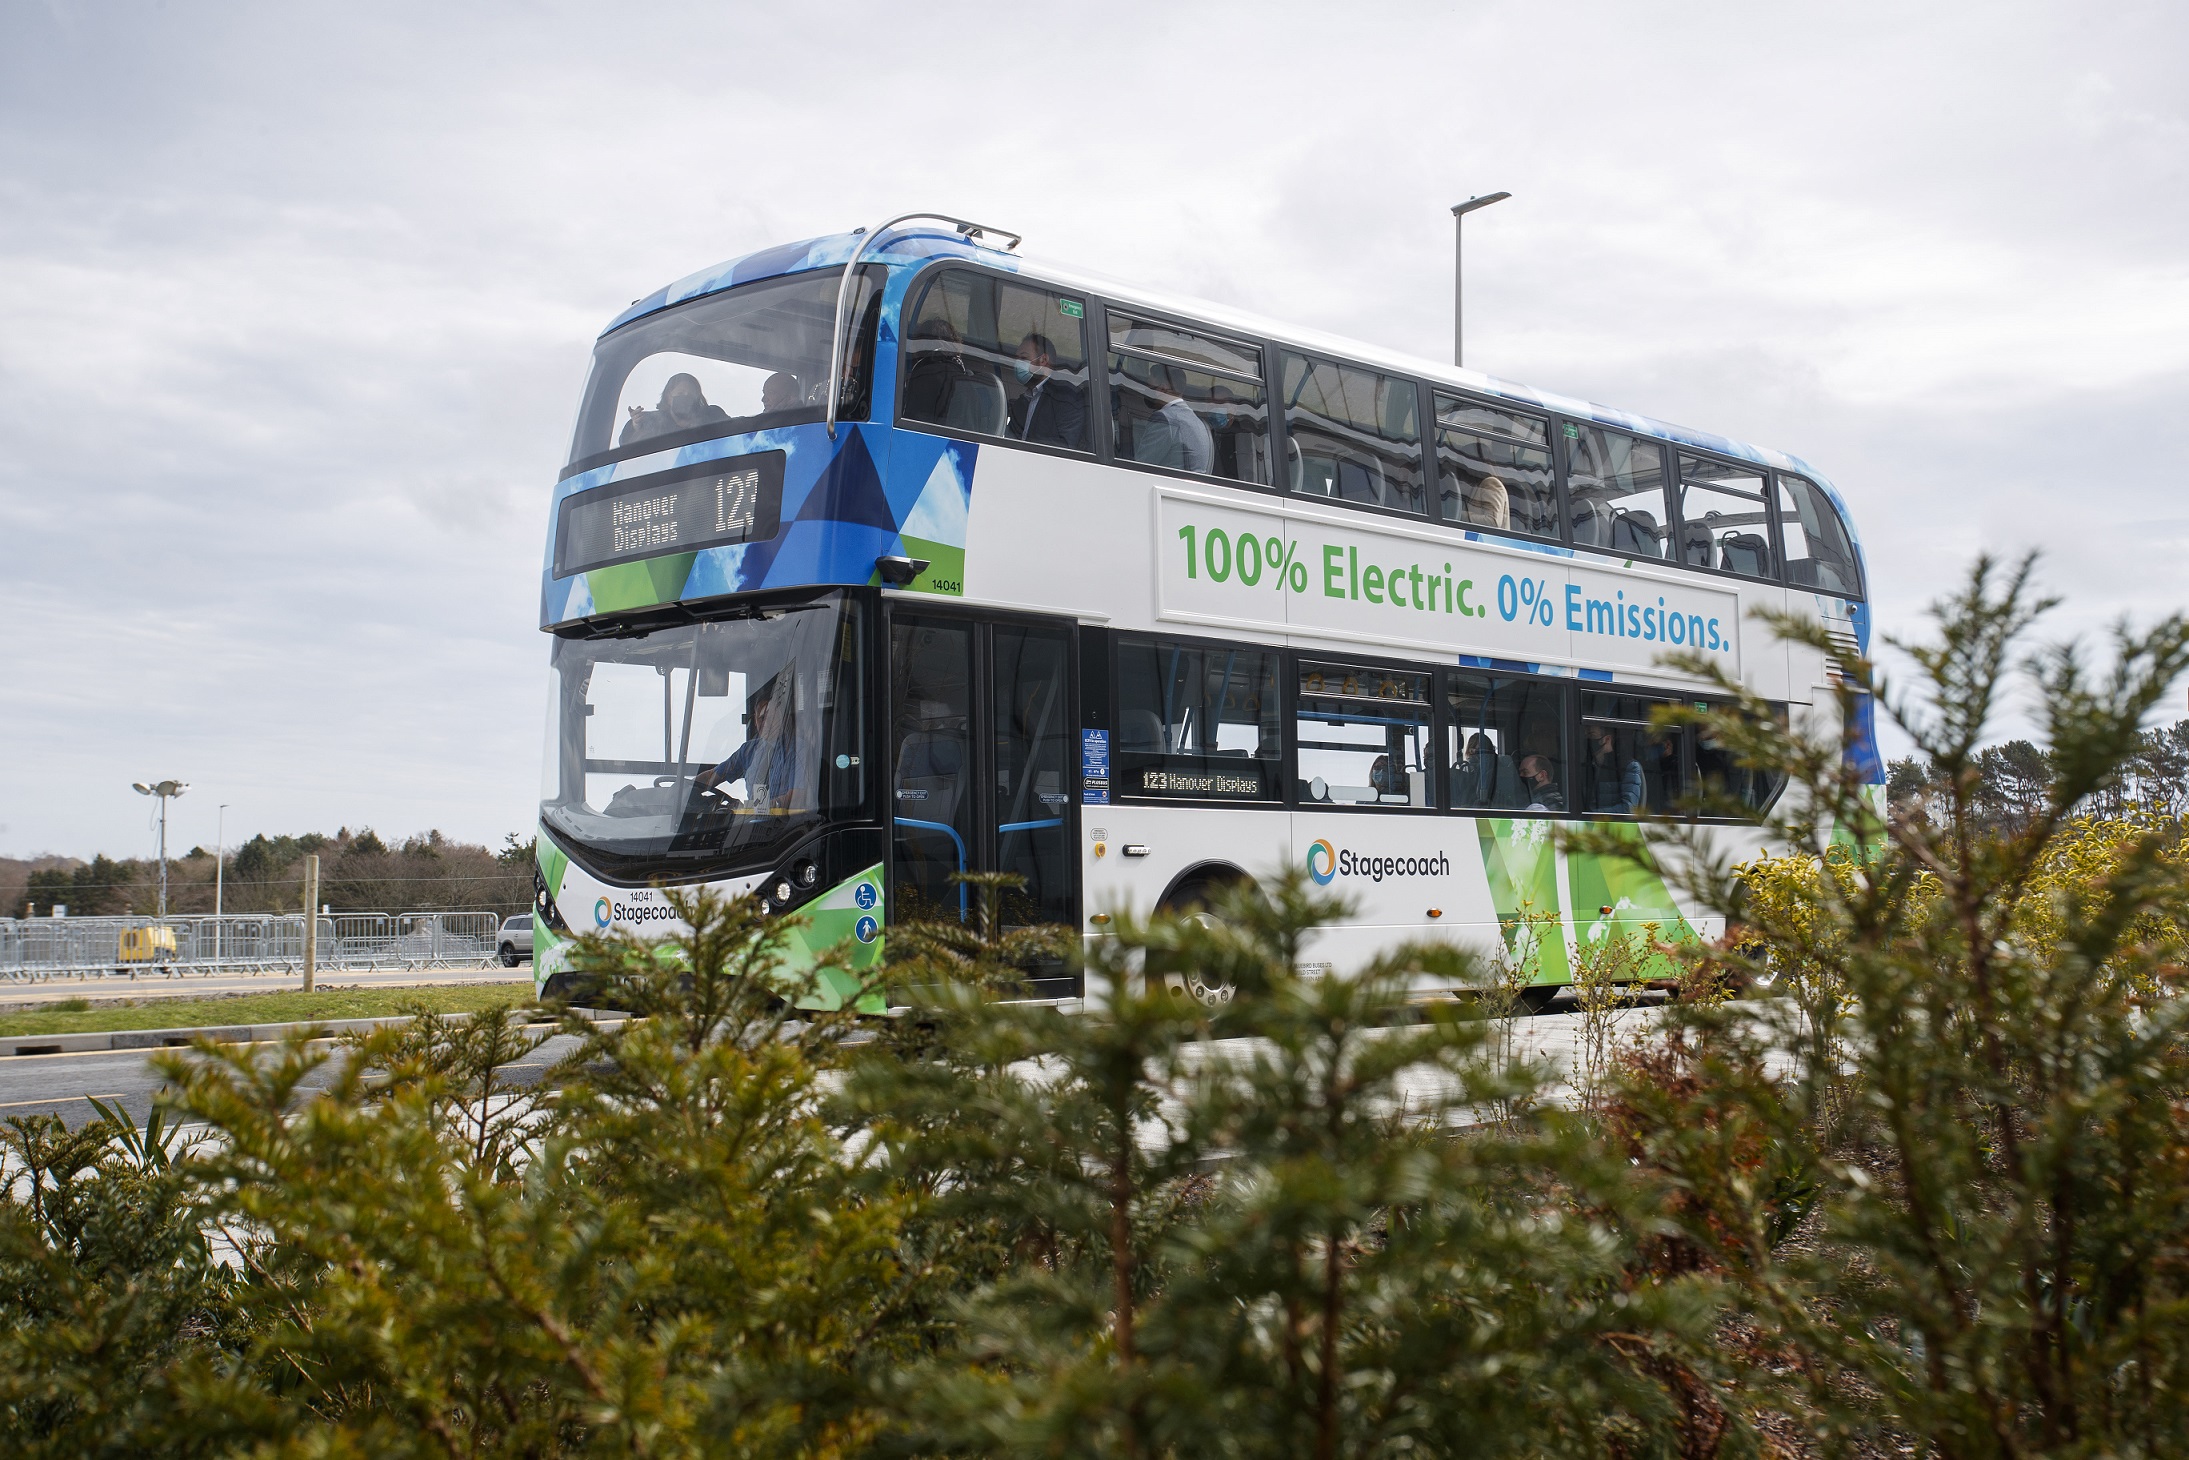 UK leads way for battery electric buses